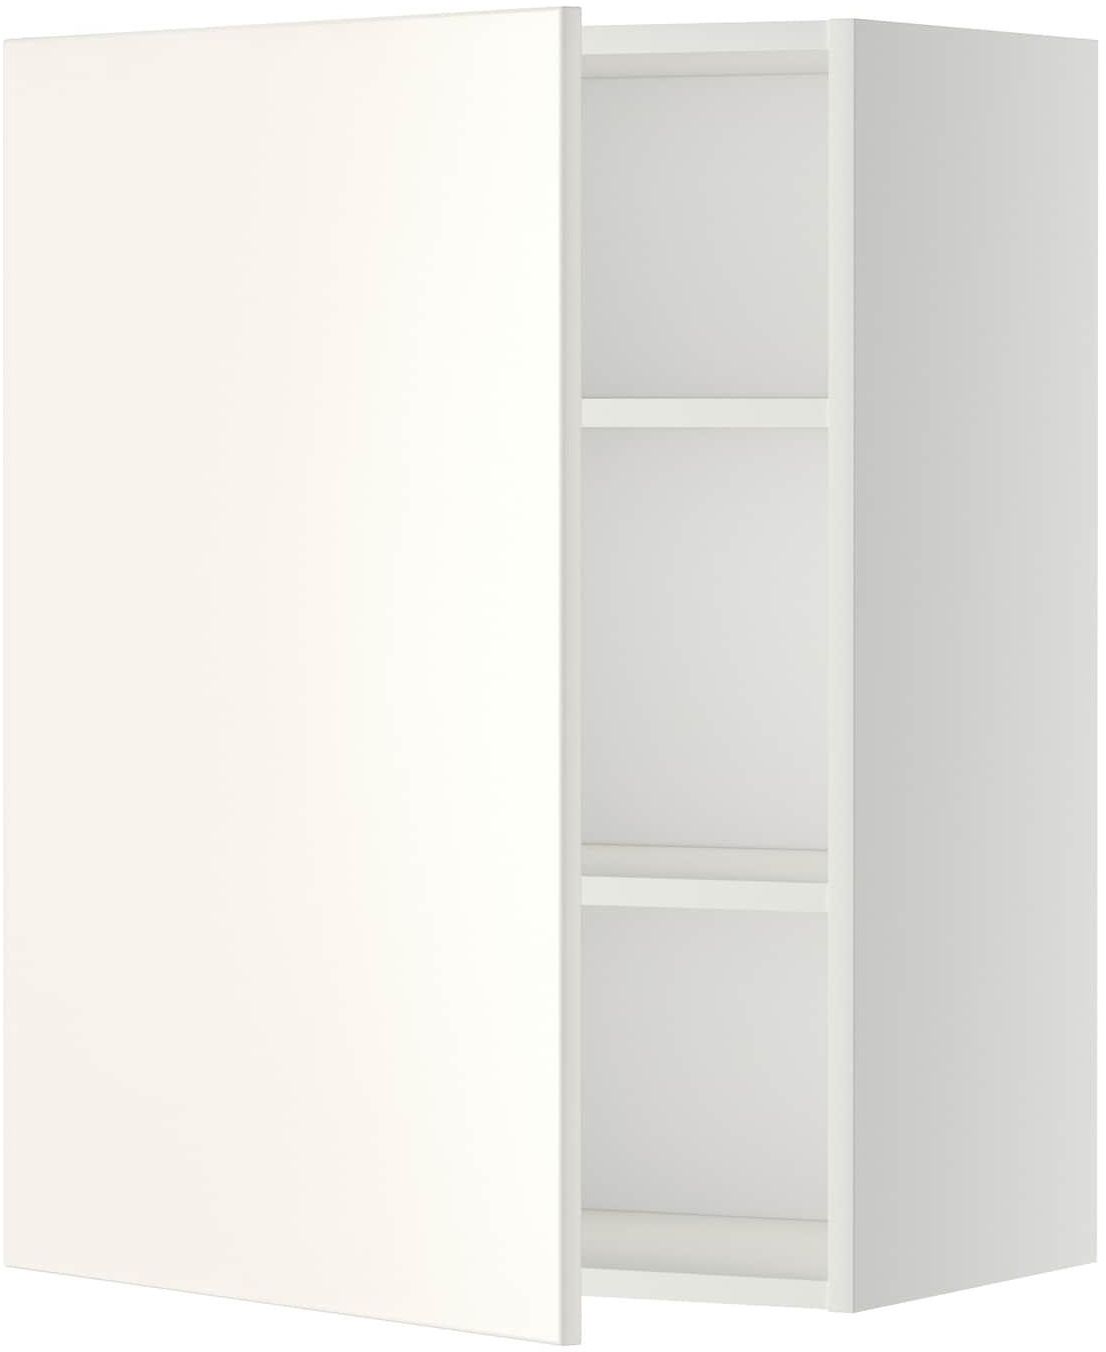 METOD Wall cabinet with shelves - white/Veddinge white 60x80 cm